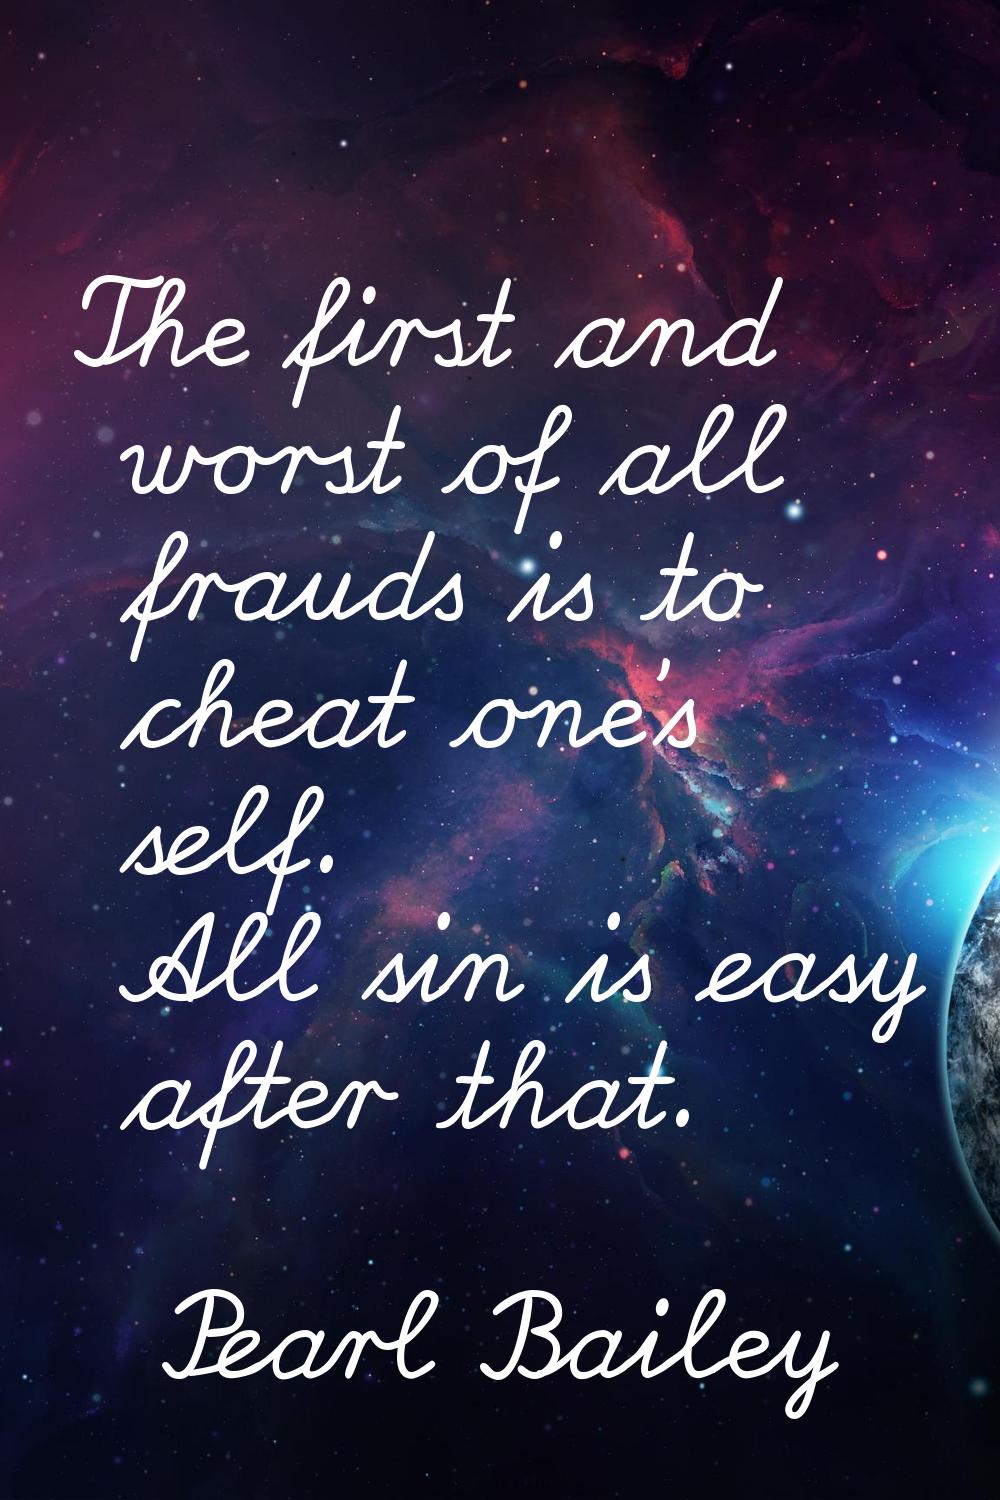 The first and worst of all frauds is to cheat one's self. All sin is easy after that.